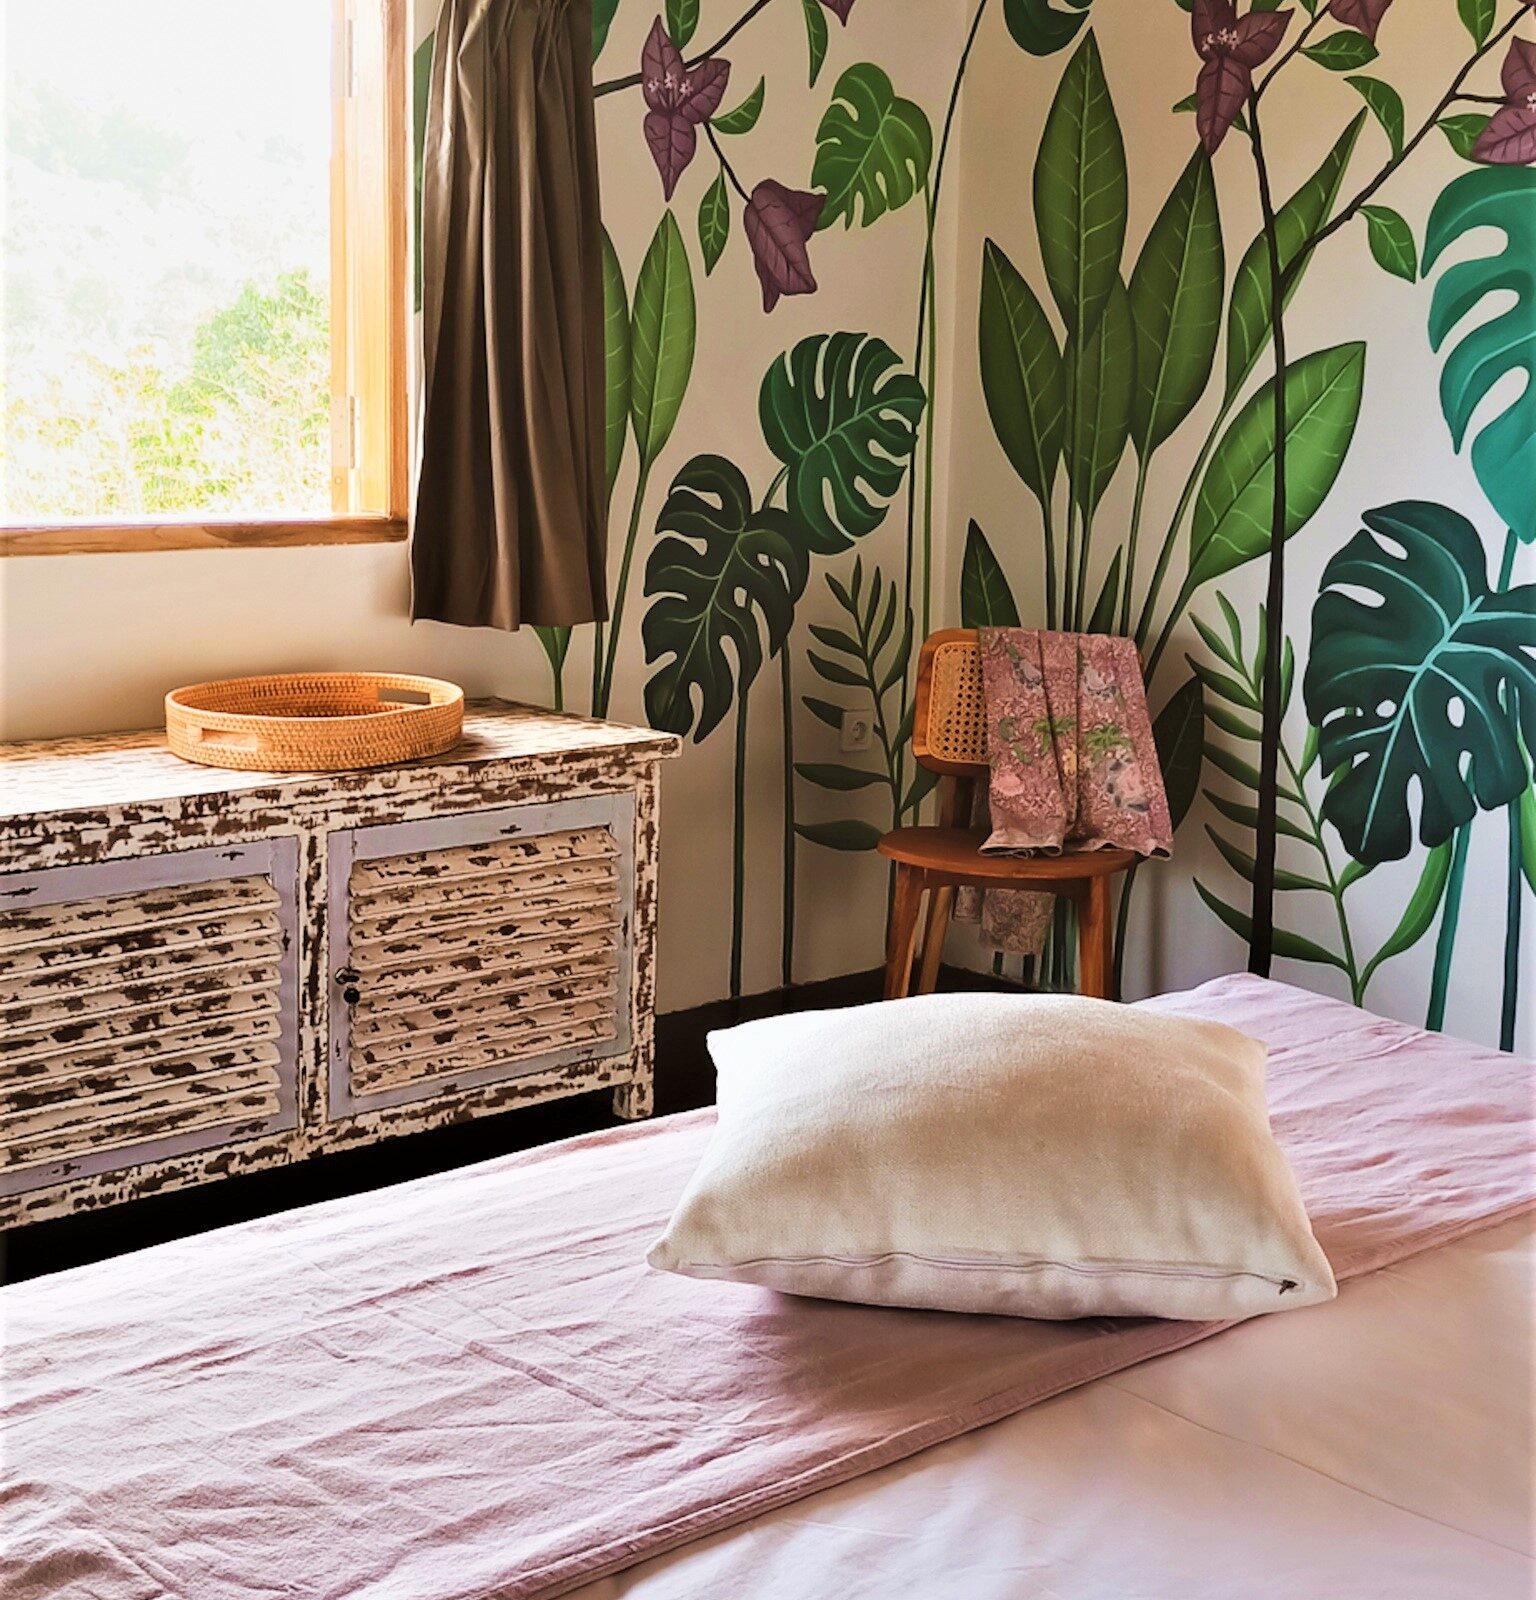 FabuLous Place Lombok surf villa purple bedroom with bougainvillea wall painting